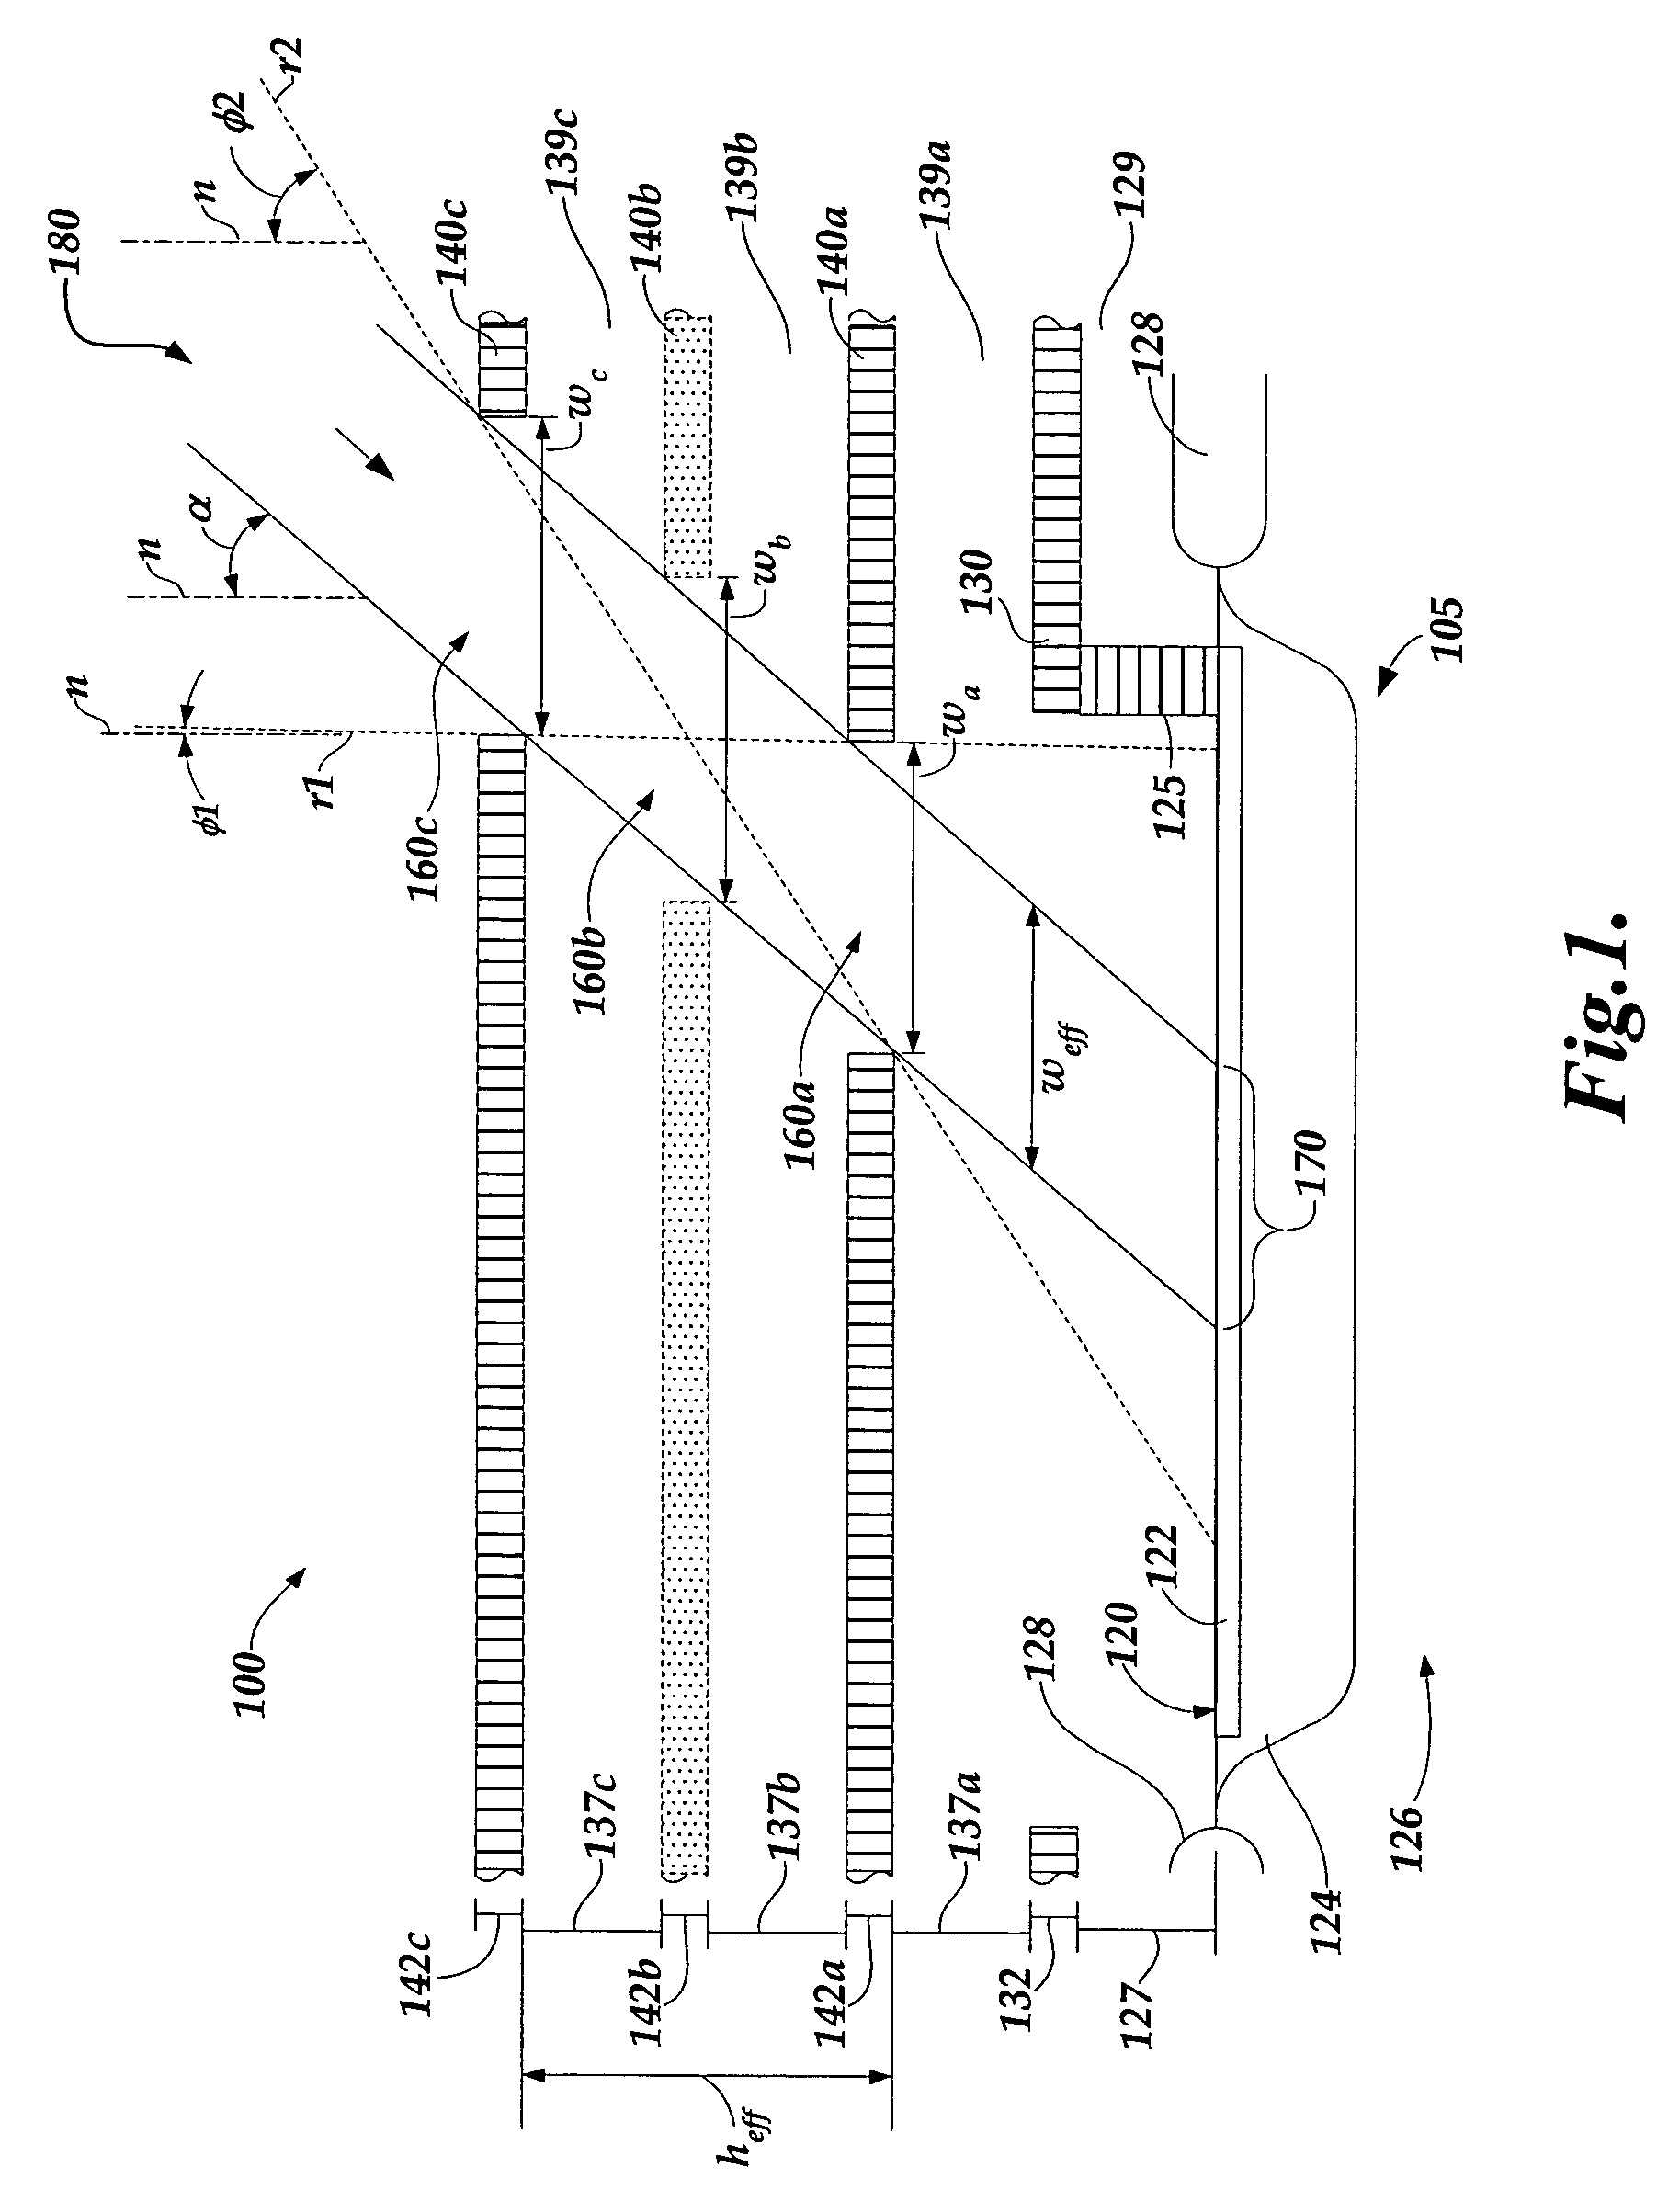 Incident light angle detector for light sensitive integrated circuit